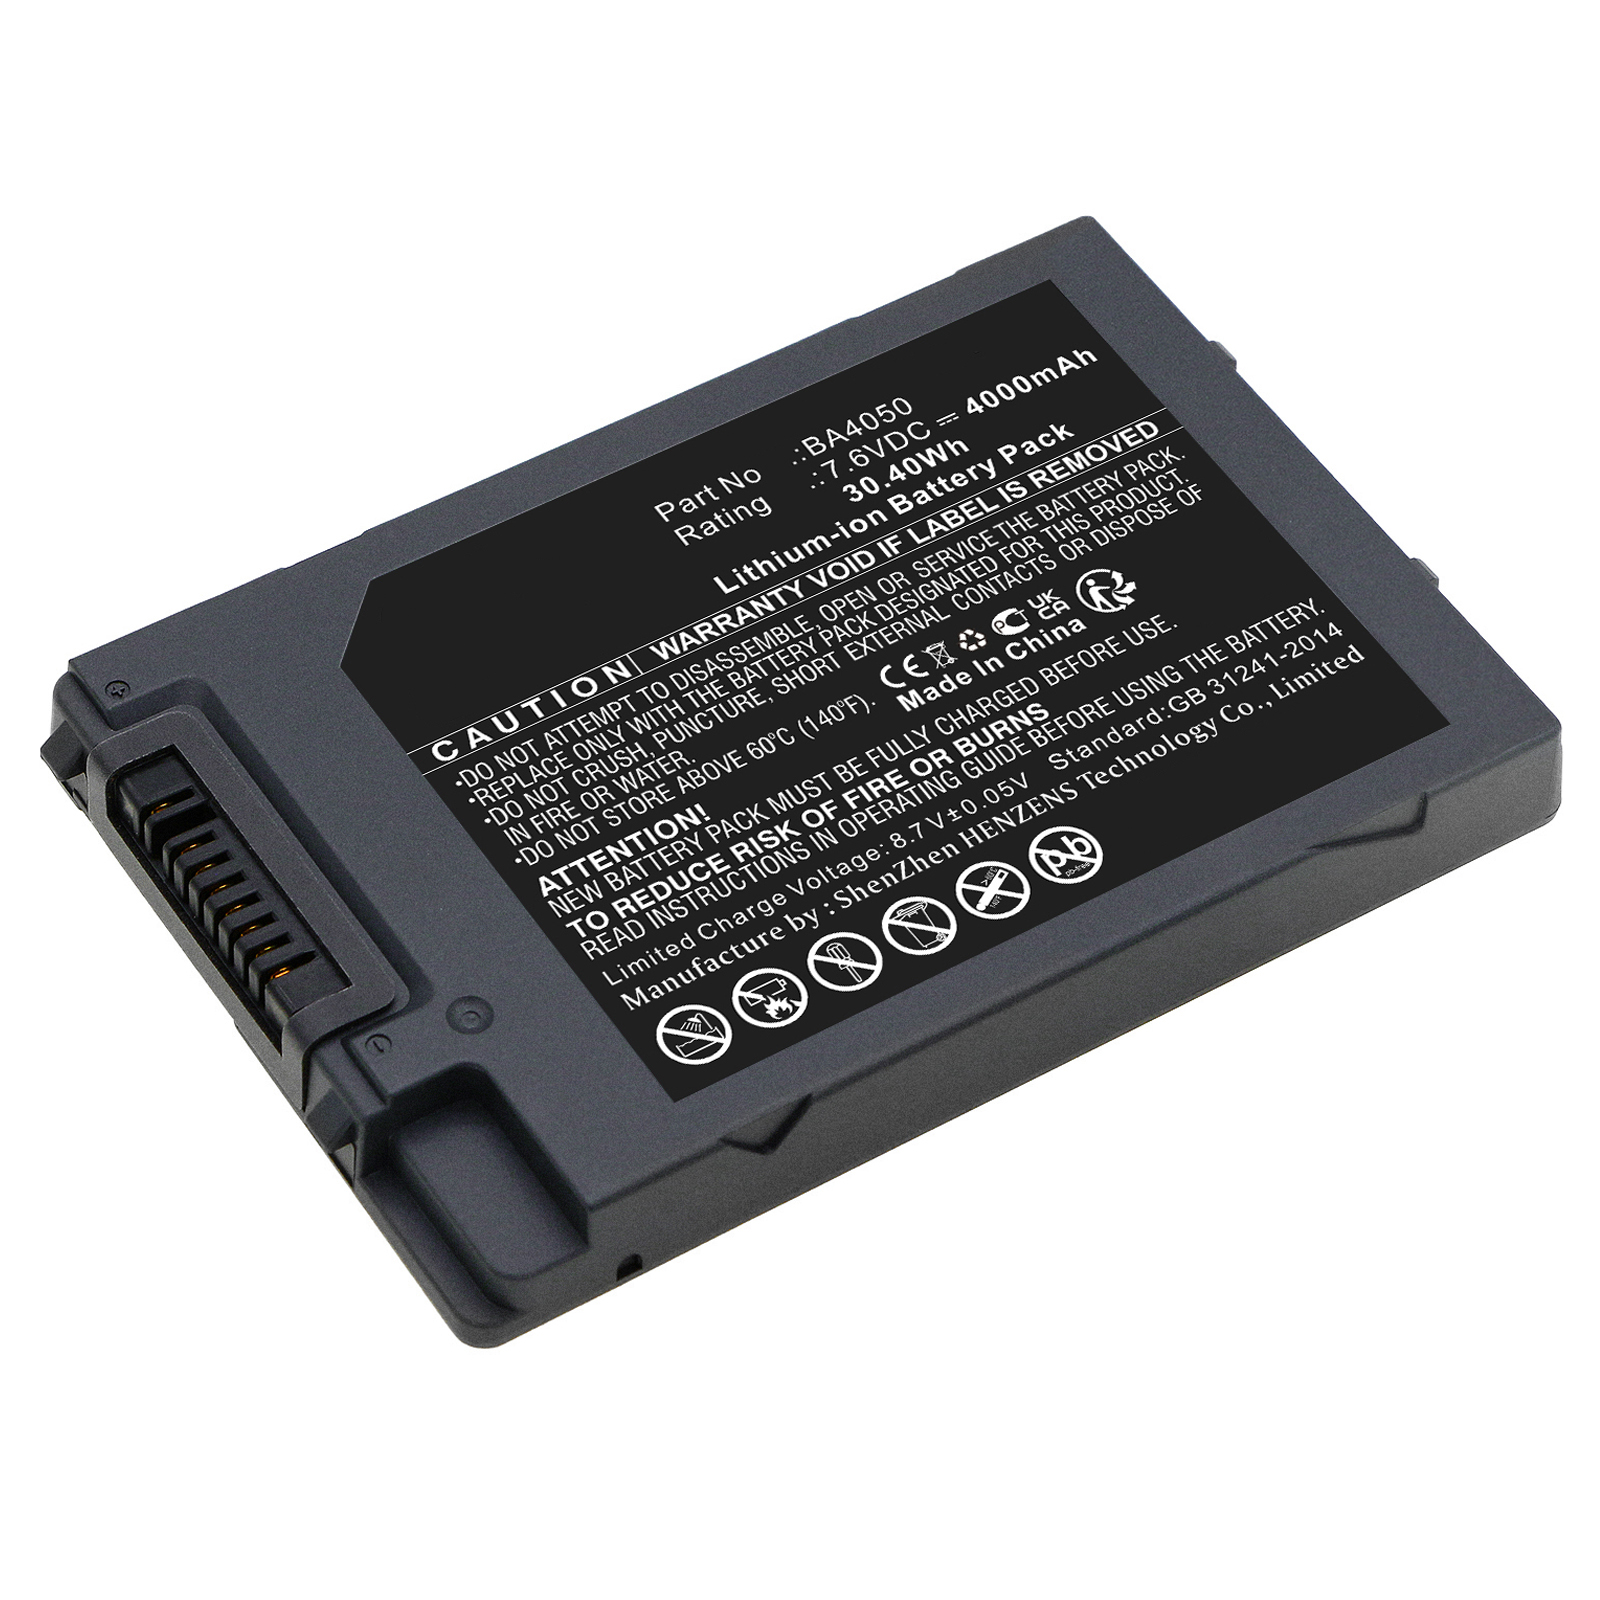 Synergy Digital Equipment Battery, Compatible with UniStrong BA4050 Equipment Battery (Li-ion, 7.6V, 4000mAh)